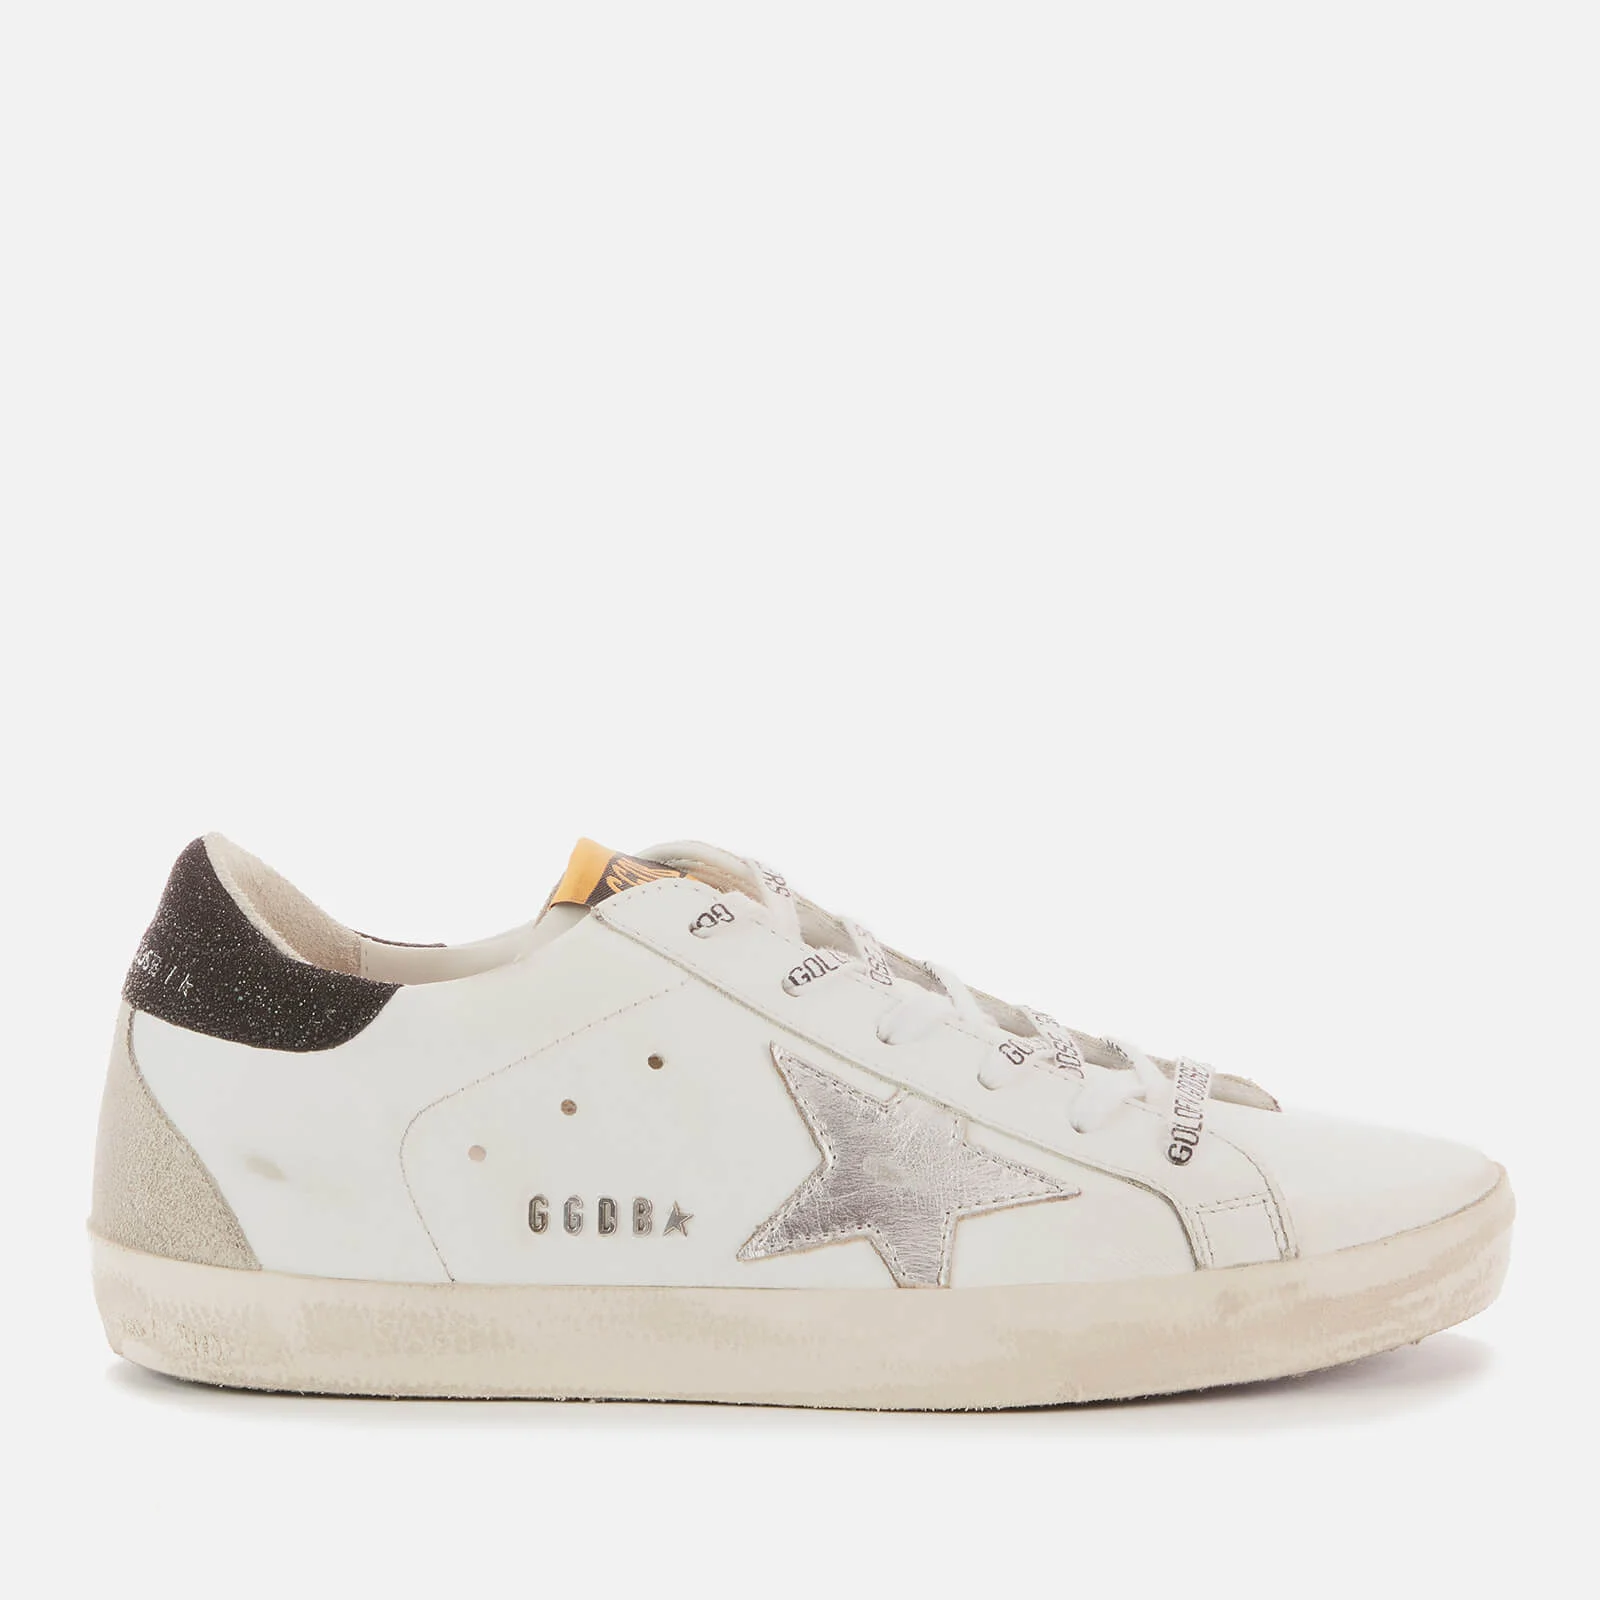 Golden Goose Women's Superstar Leather Trainers - White/Silver/Black Image 1